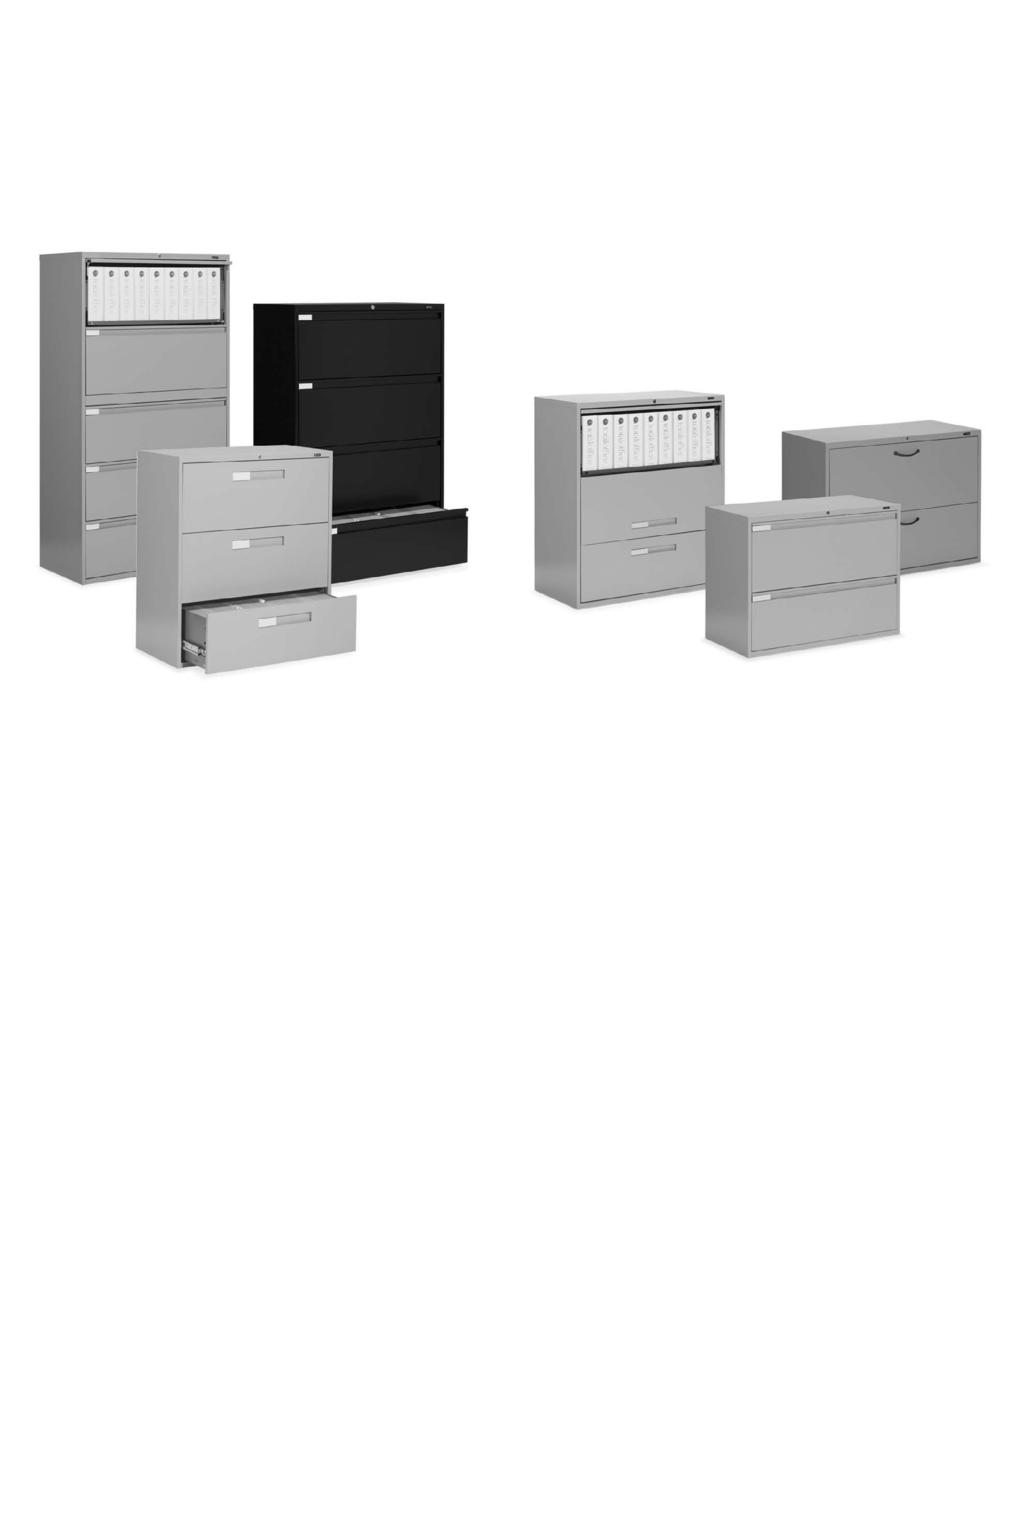 F FILING + STORAGE Global s wide variety of lateral files can satisfy every price point and individual style.